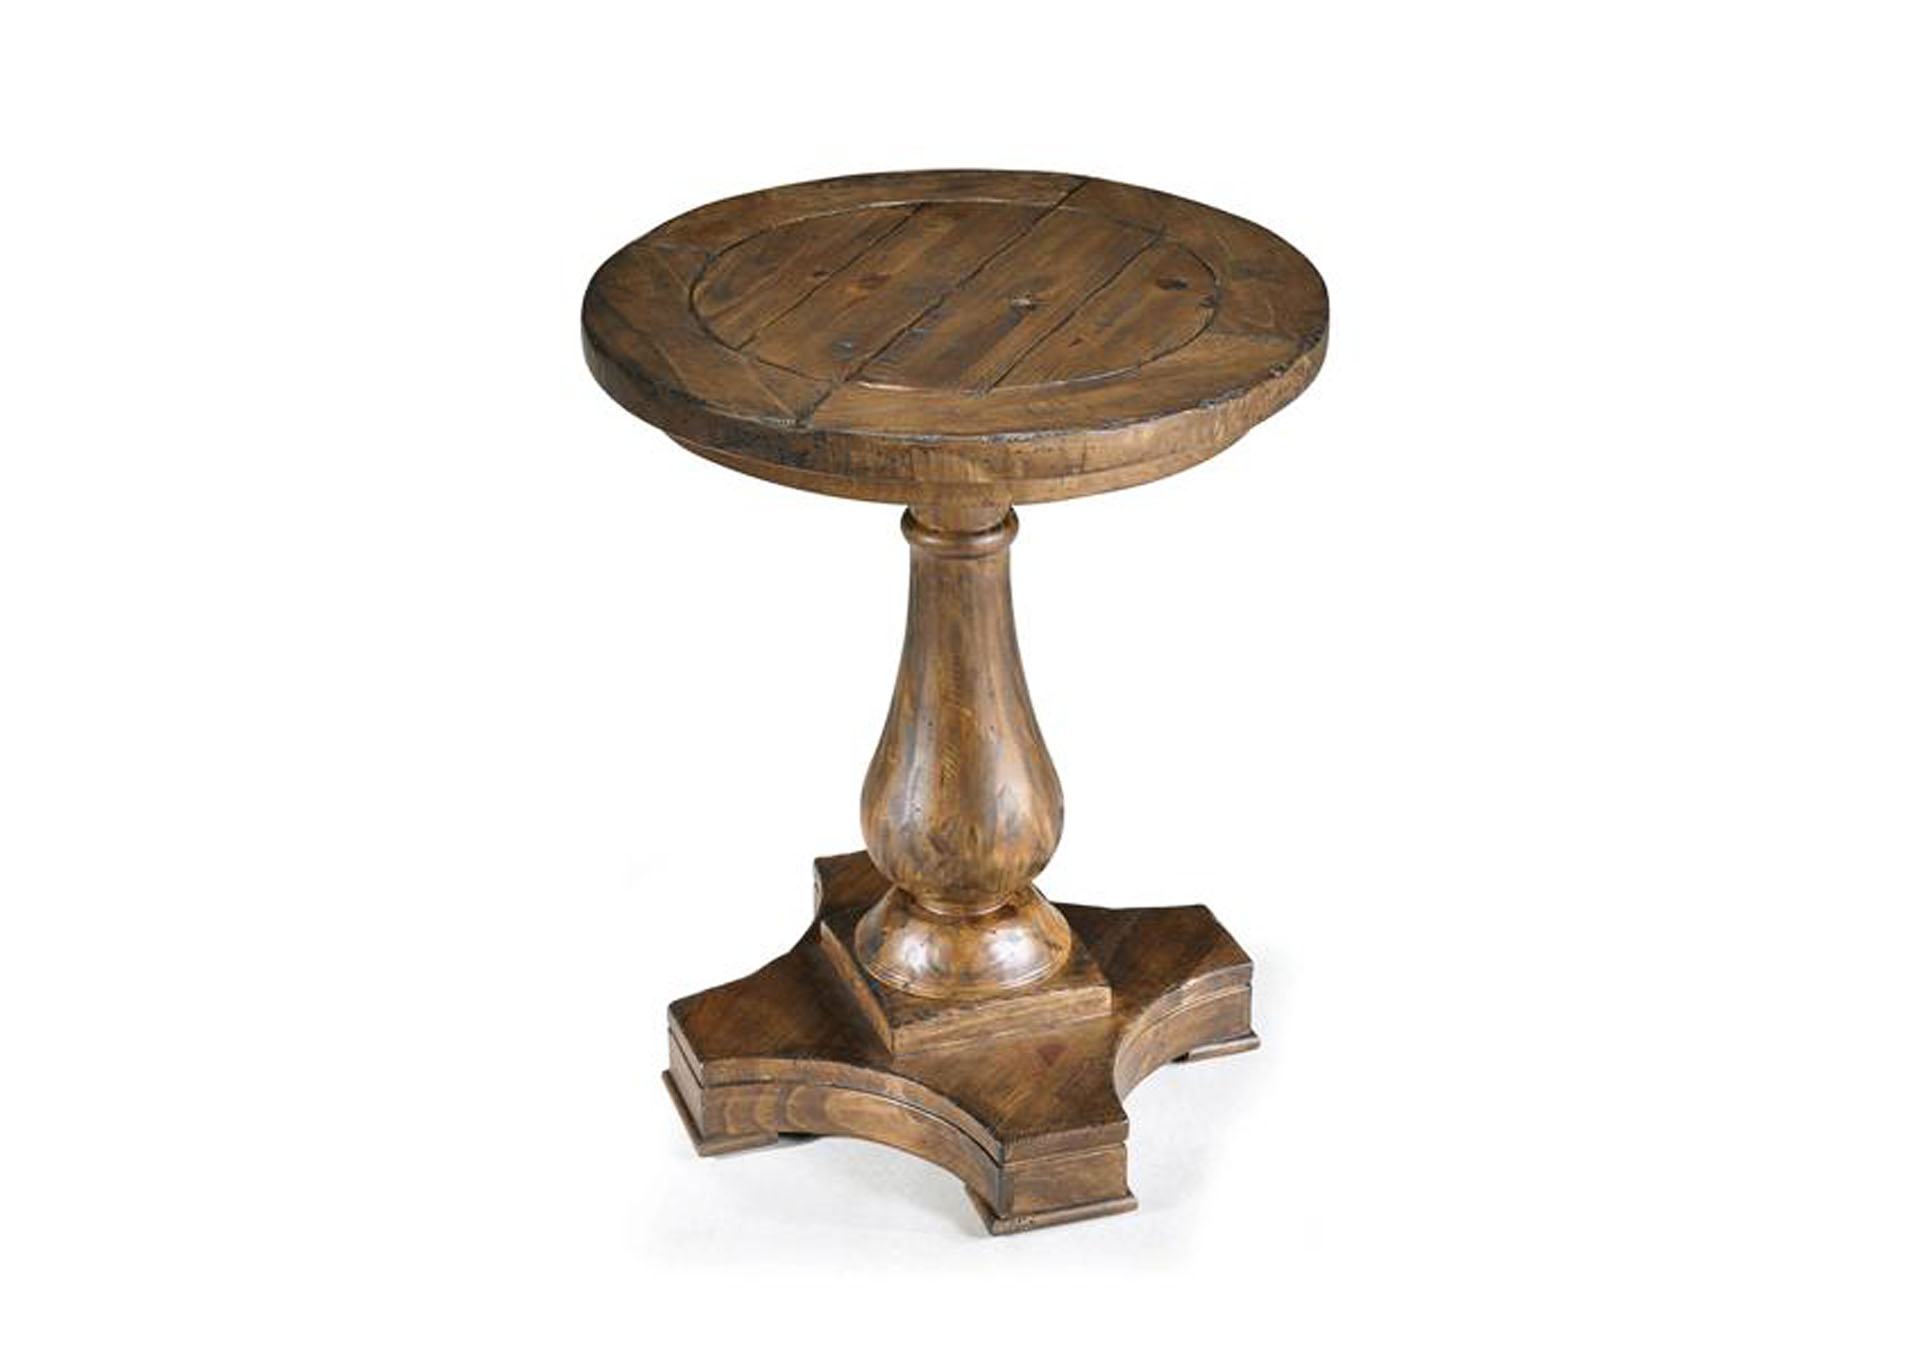 Densbury Natural pine Round Accent End Table,Magnussen